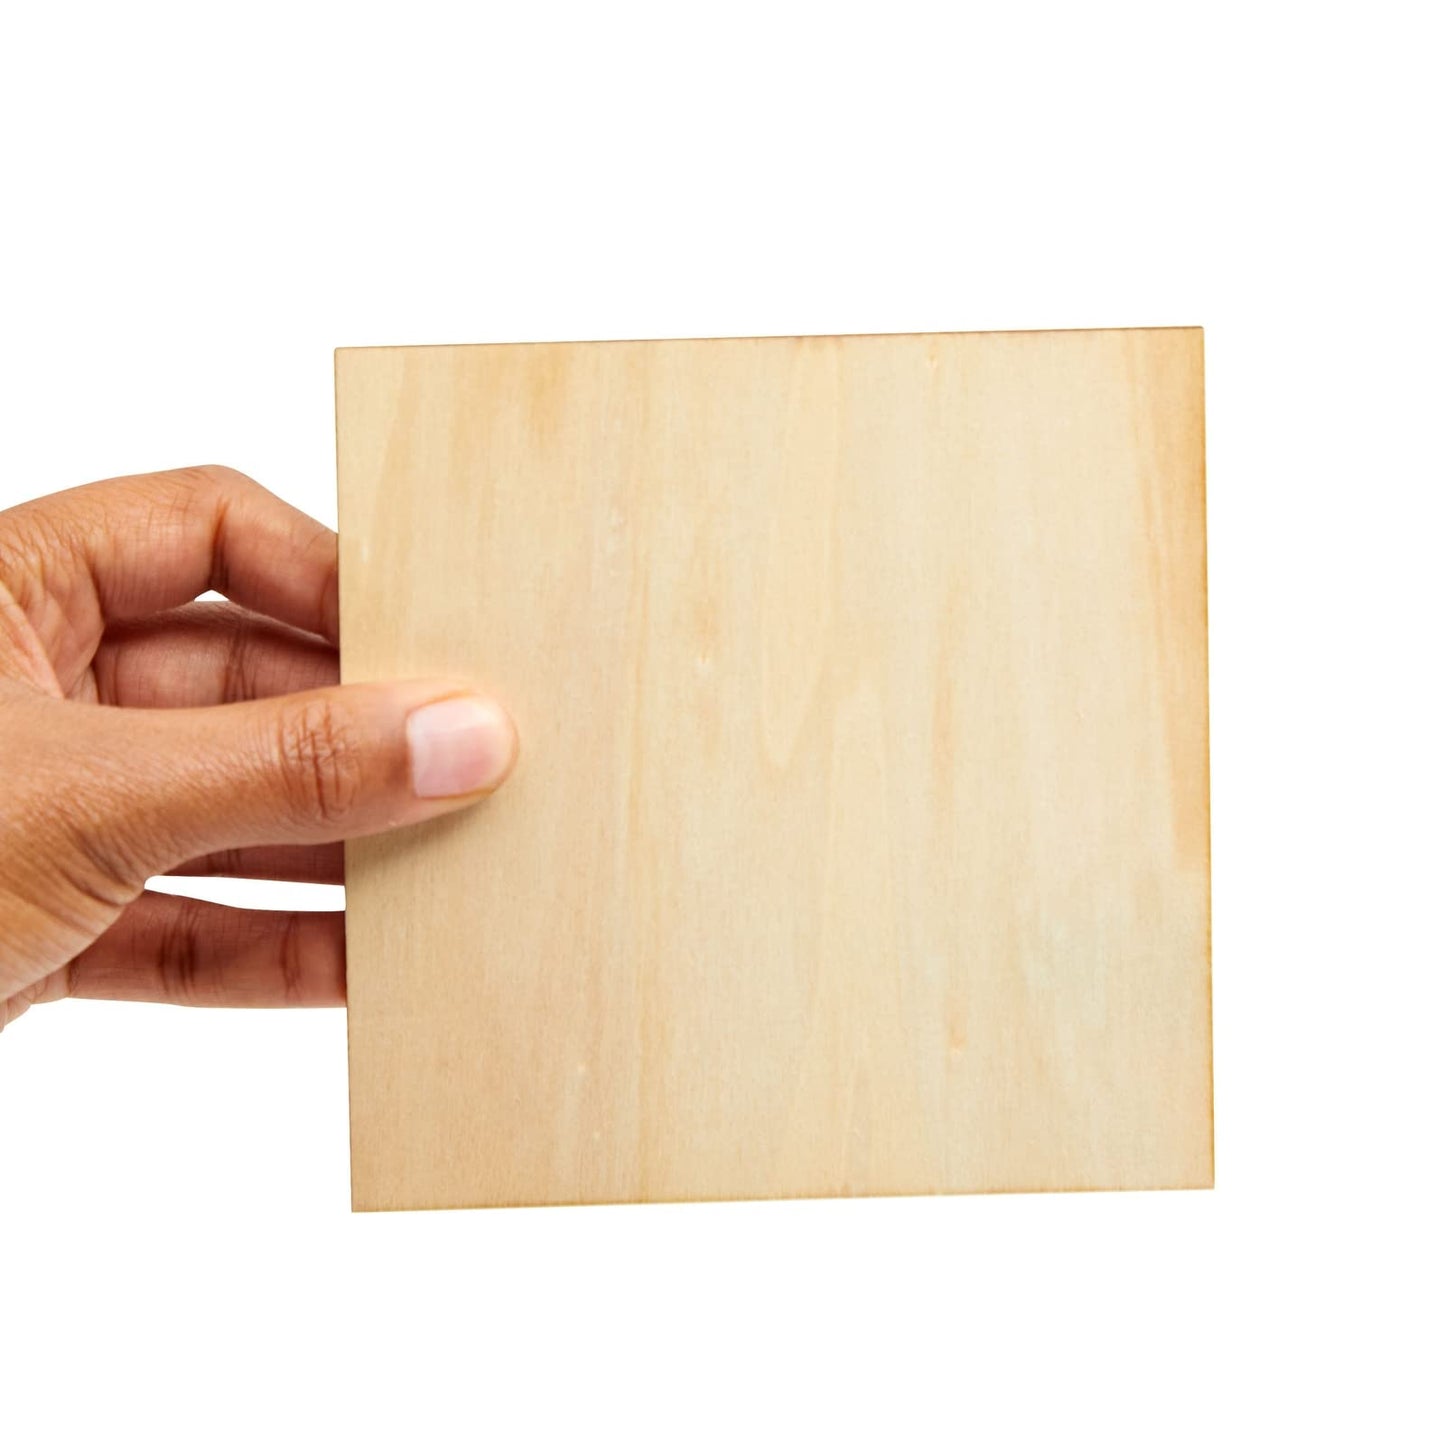 36 Pack 5x5 Wooden Squares for Crafts, Unfinished Wood Tiles for DIY Projects (0.1 in Thick)